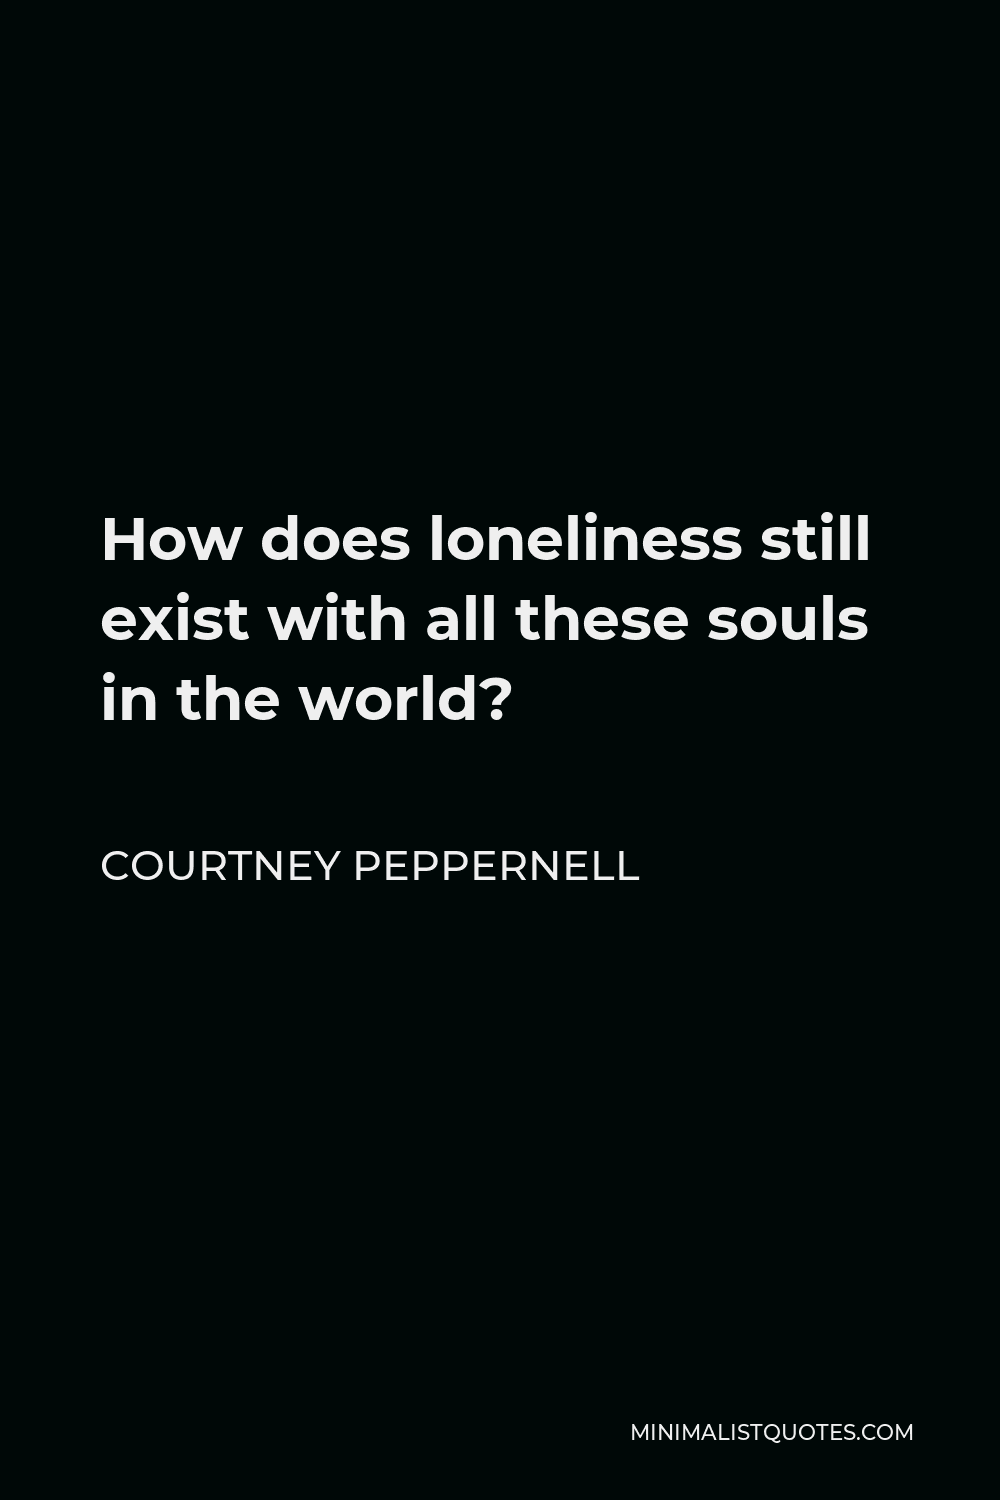 Courtney Peppernell Quote - How does loneliness still exist with all these souls in the world?